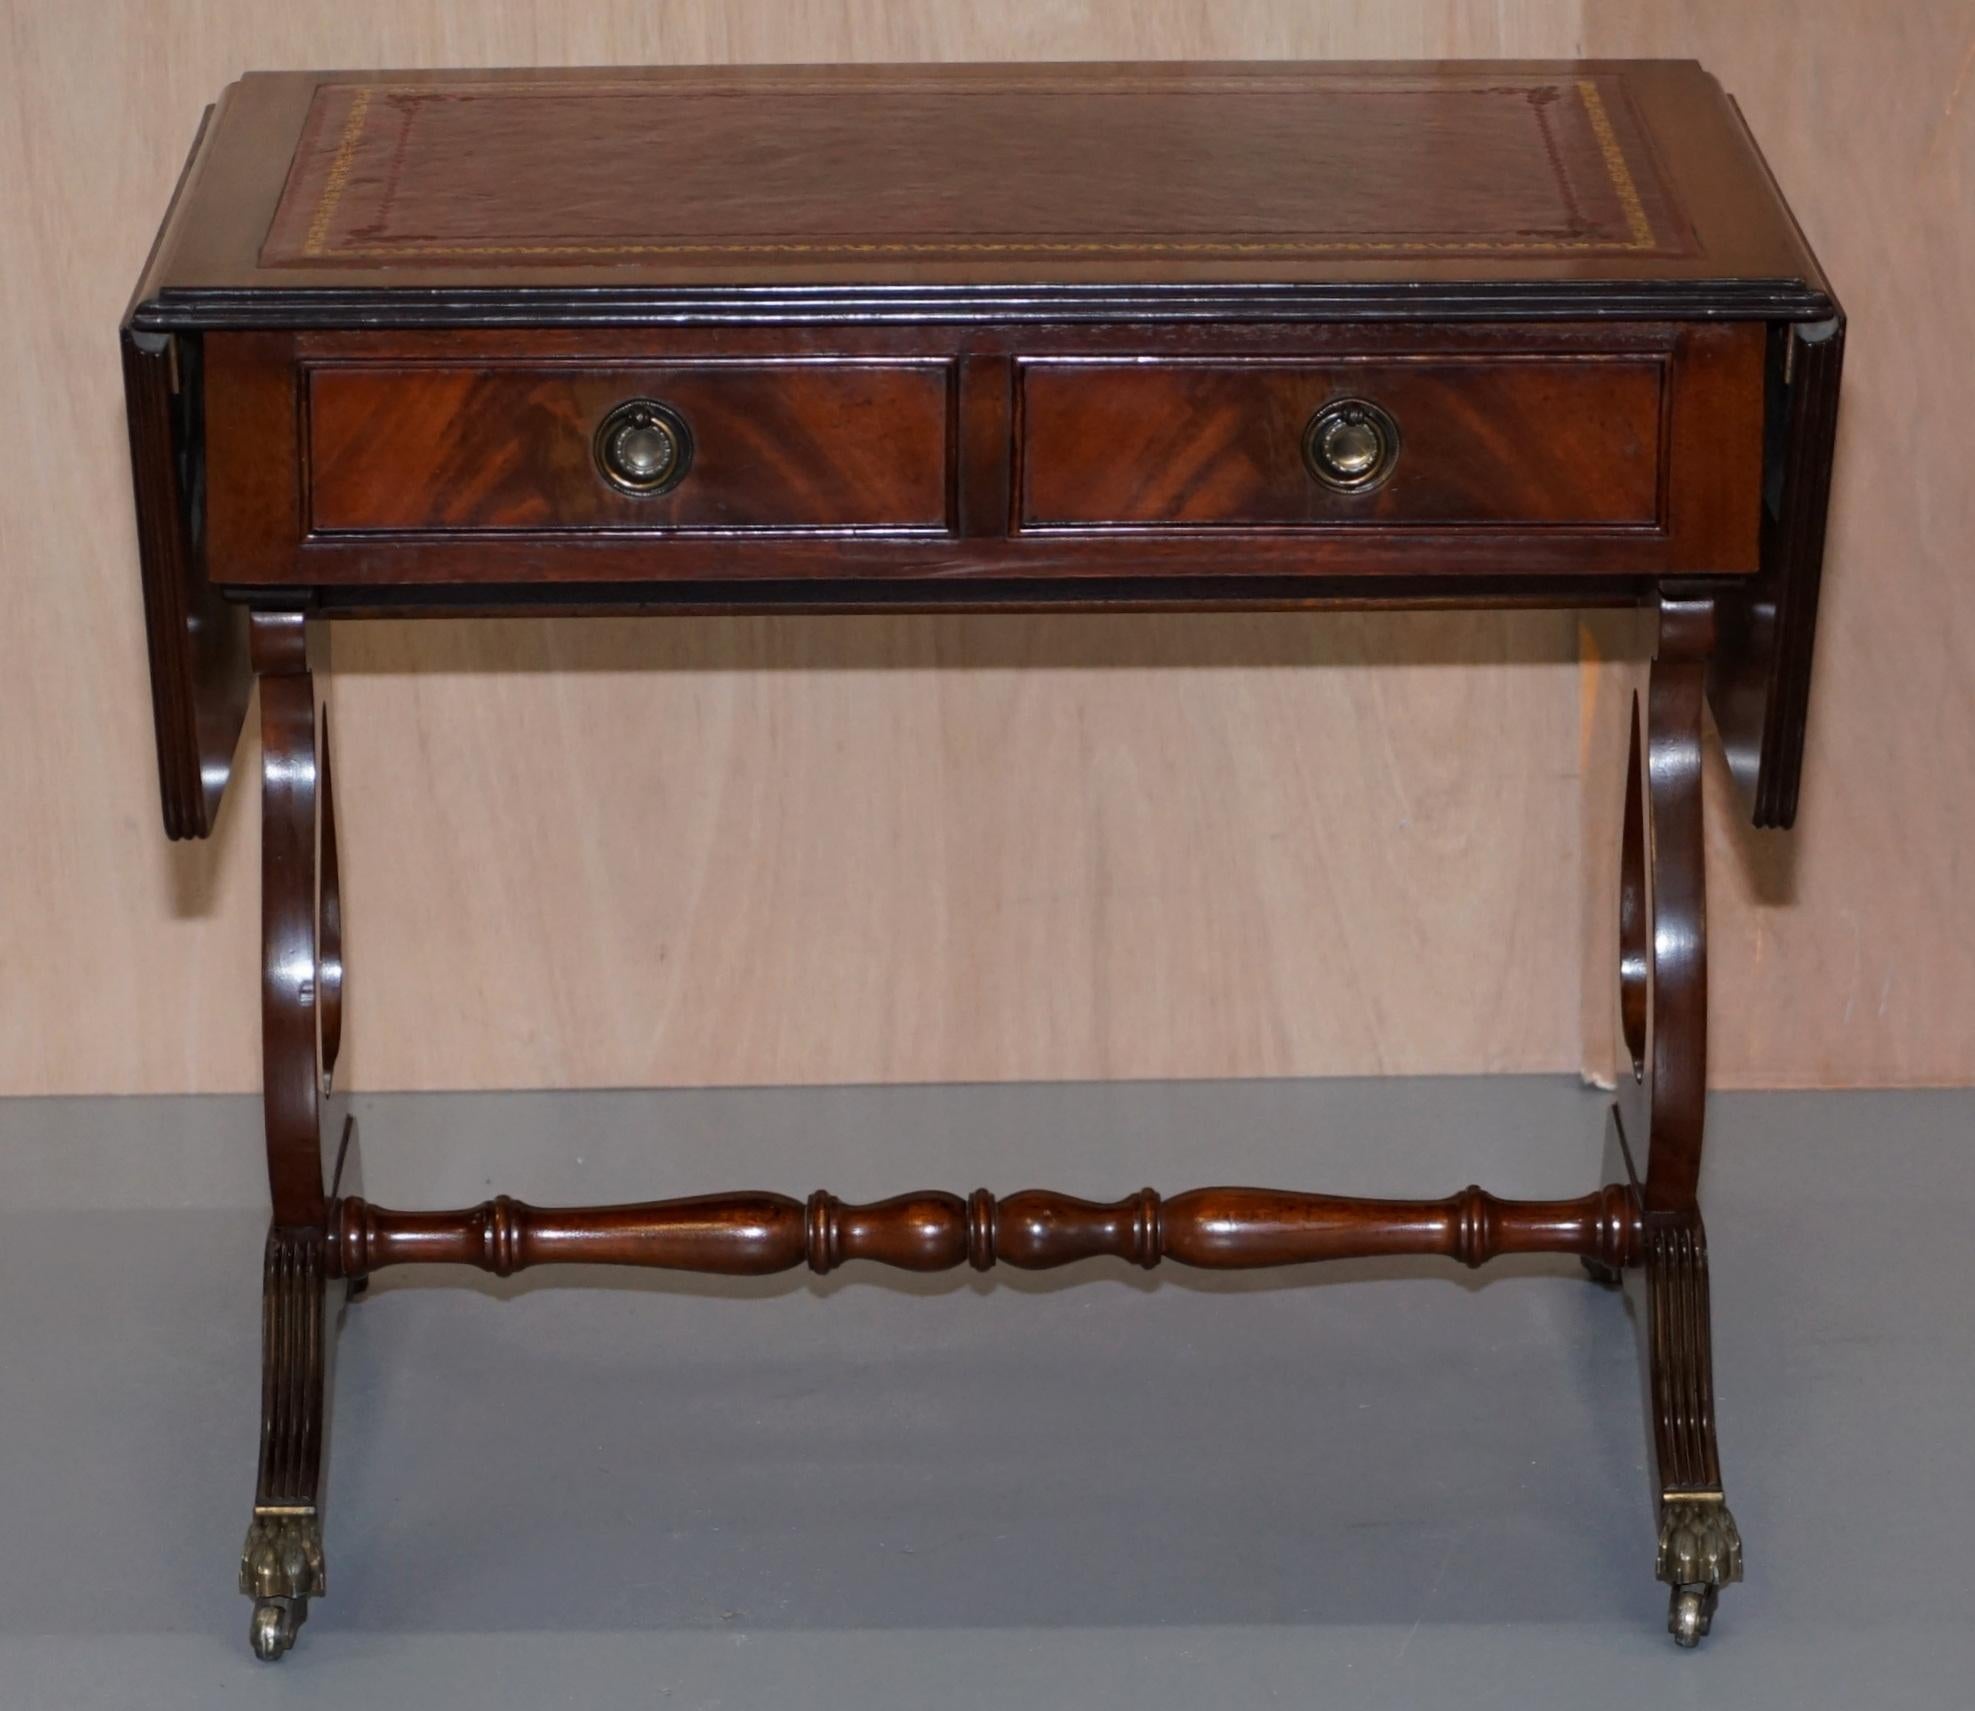 We are delighted to offer for sale this lovely large Bevan Funnell vintage Mahogany side table with extending top twin drawers and Oxblood leather top

A very good looking and versatile piece, the table has twin drawers to the front and twin false